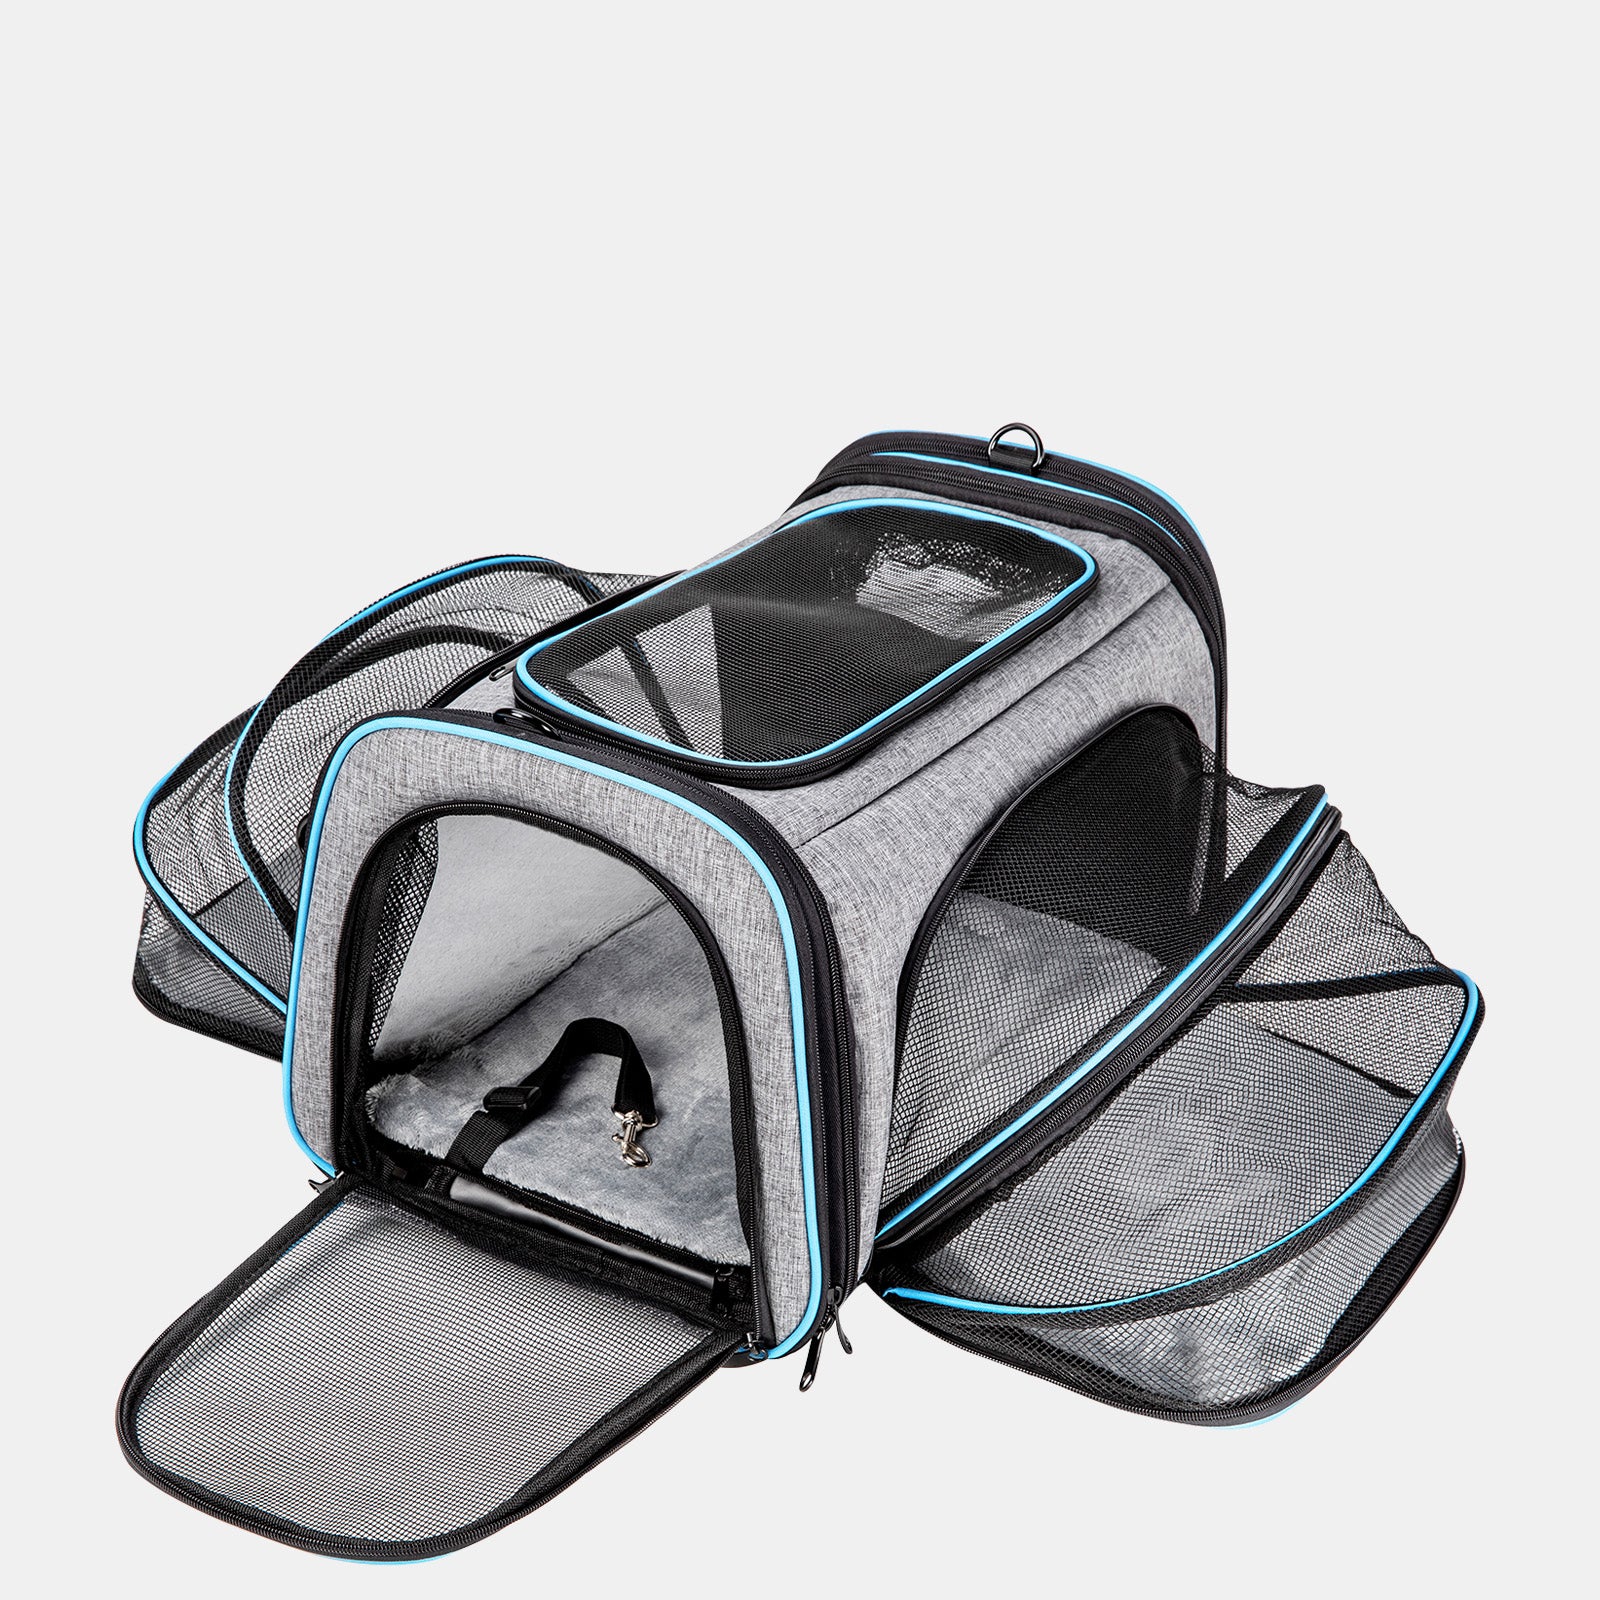 Small Expandable Pet Carrier for puppies, kittens and rabbits